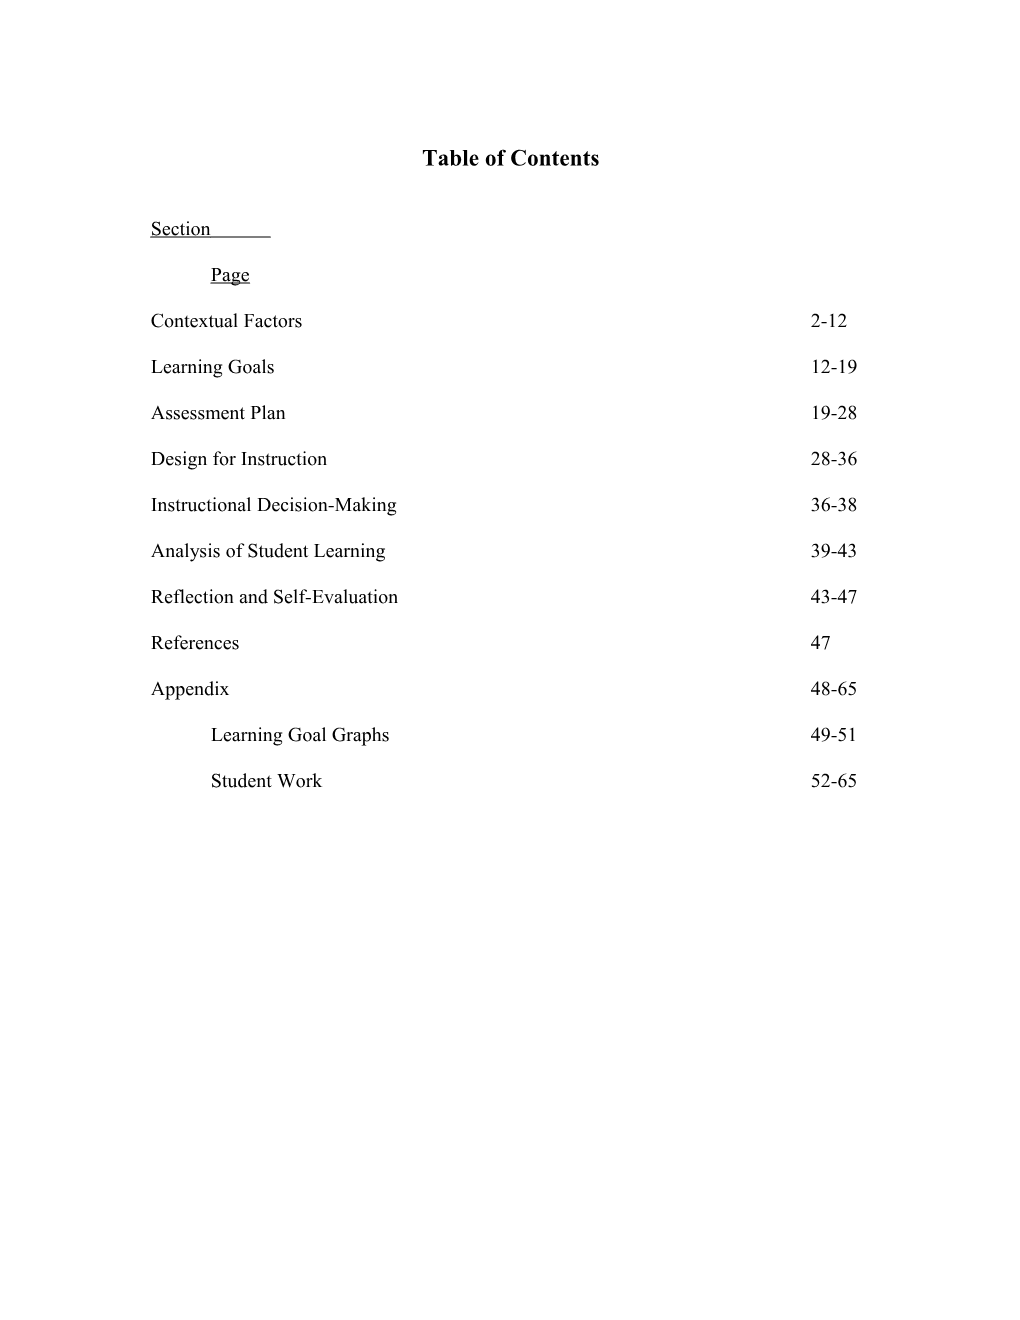 Table of Contents s182